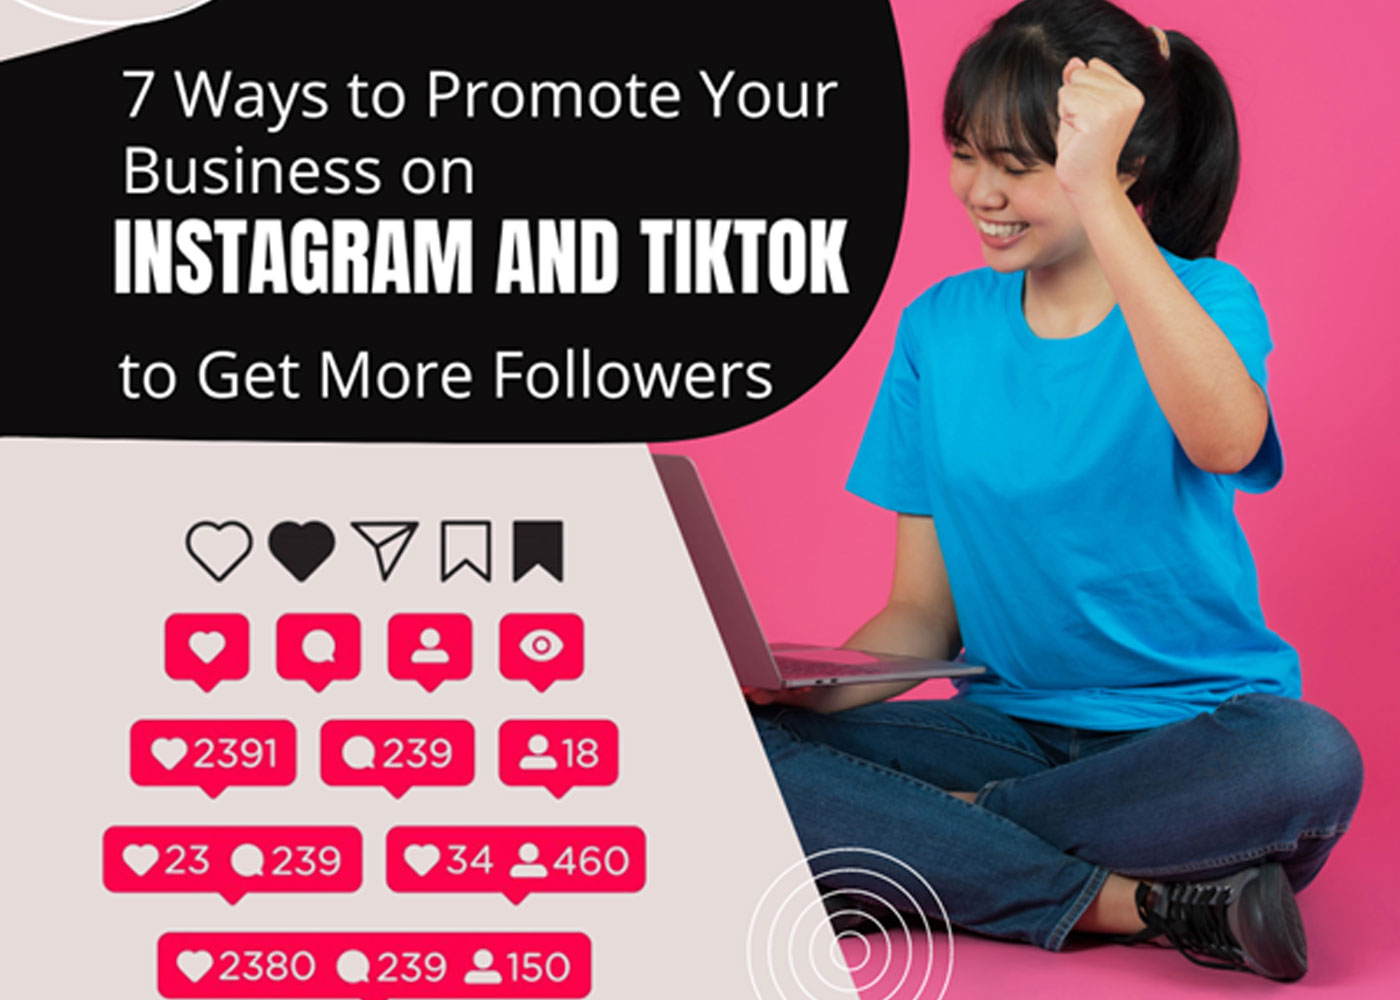 7 Ways to Promote Your Business on Instagram and TikTok to Get More Followers